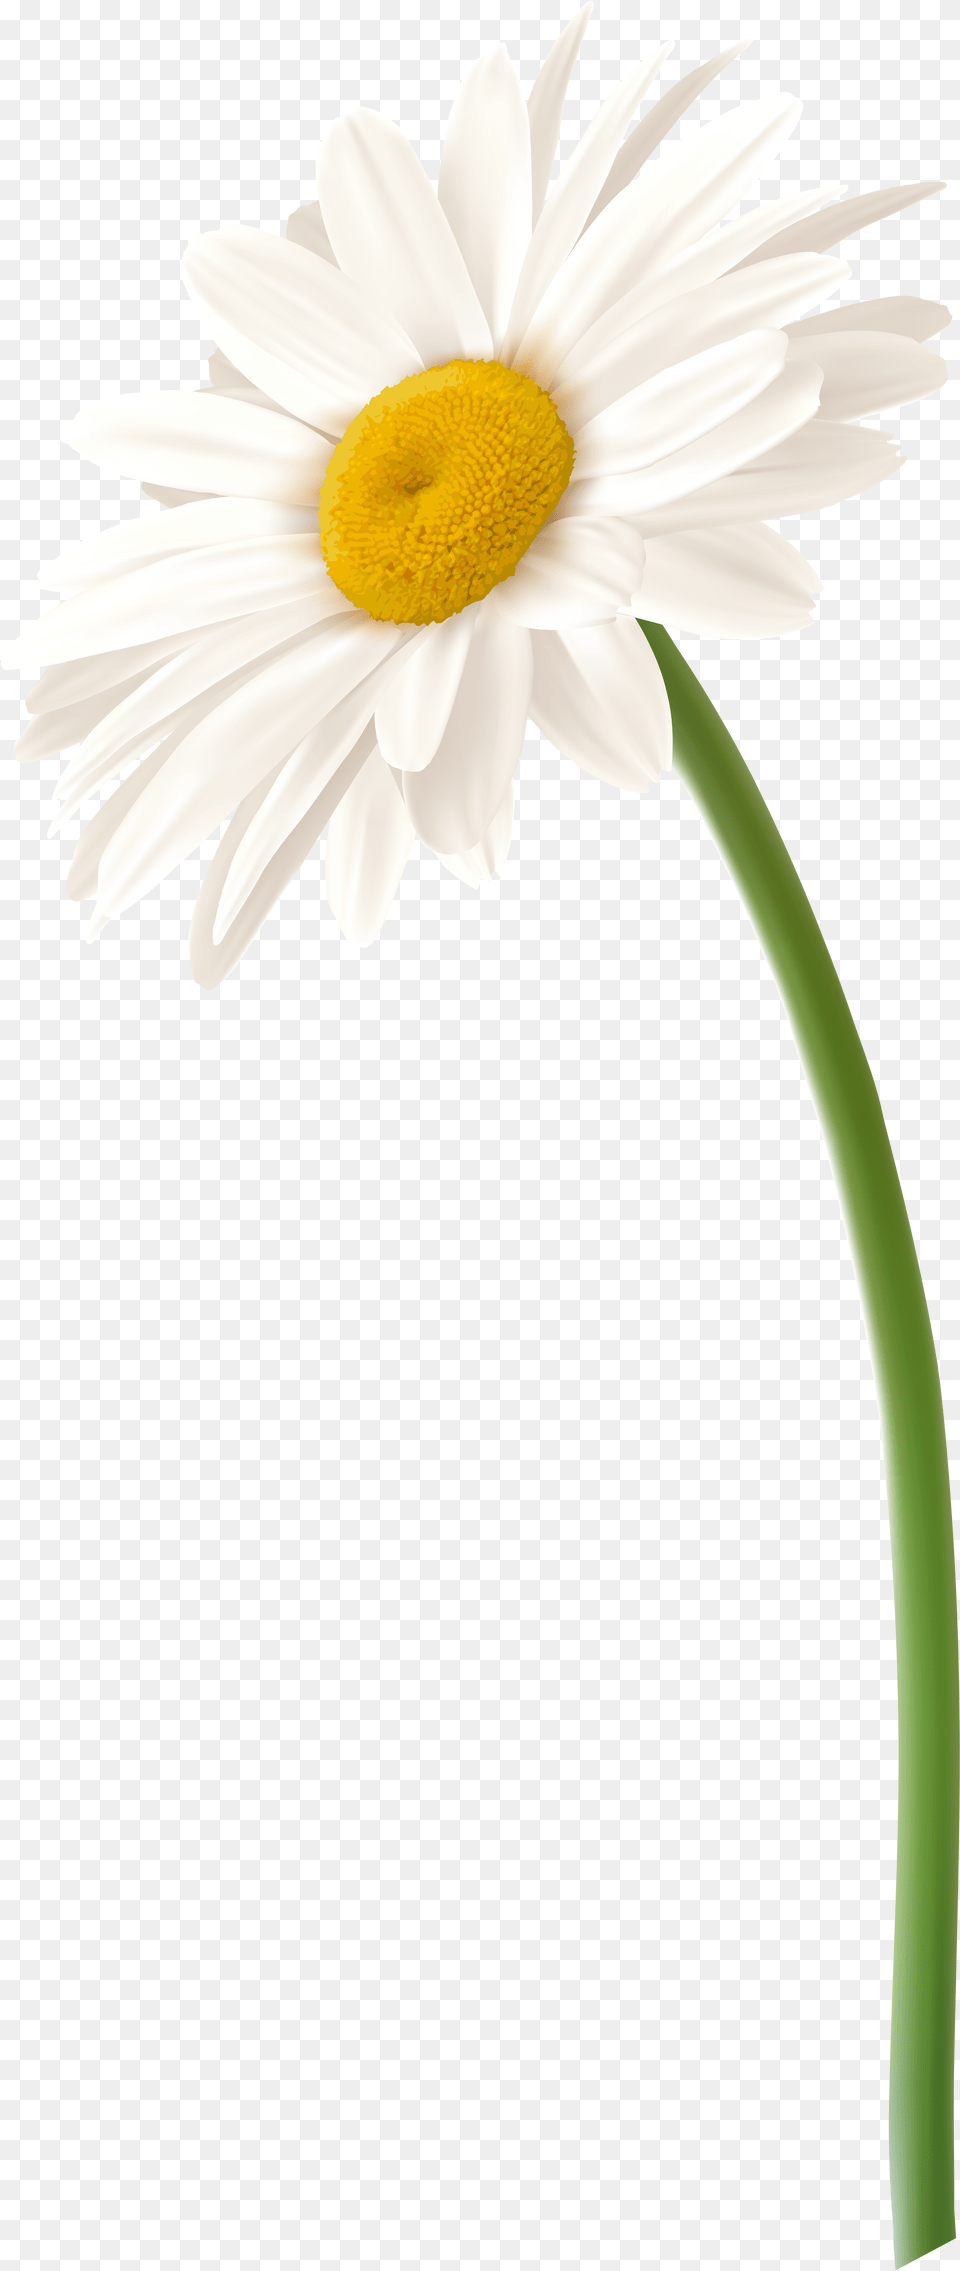 Library Of Flower Daisy Clip Free Files White Gerbera Daisy, Plant, Petal Png Image